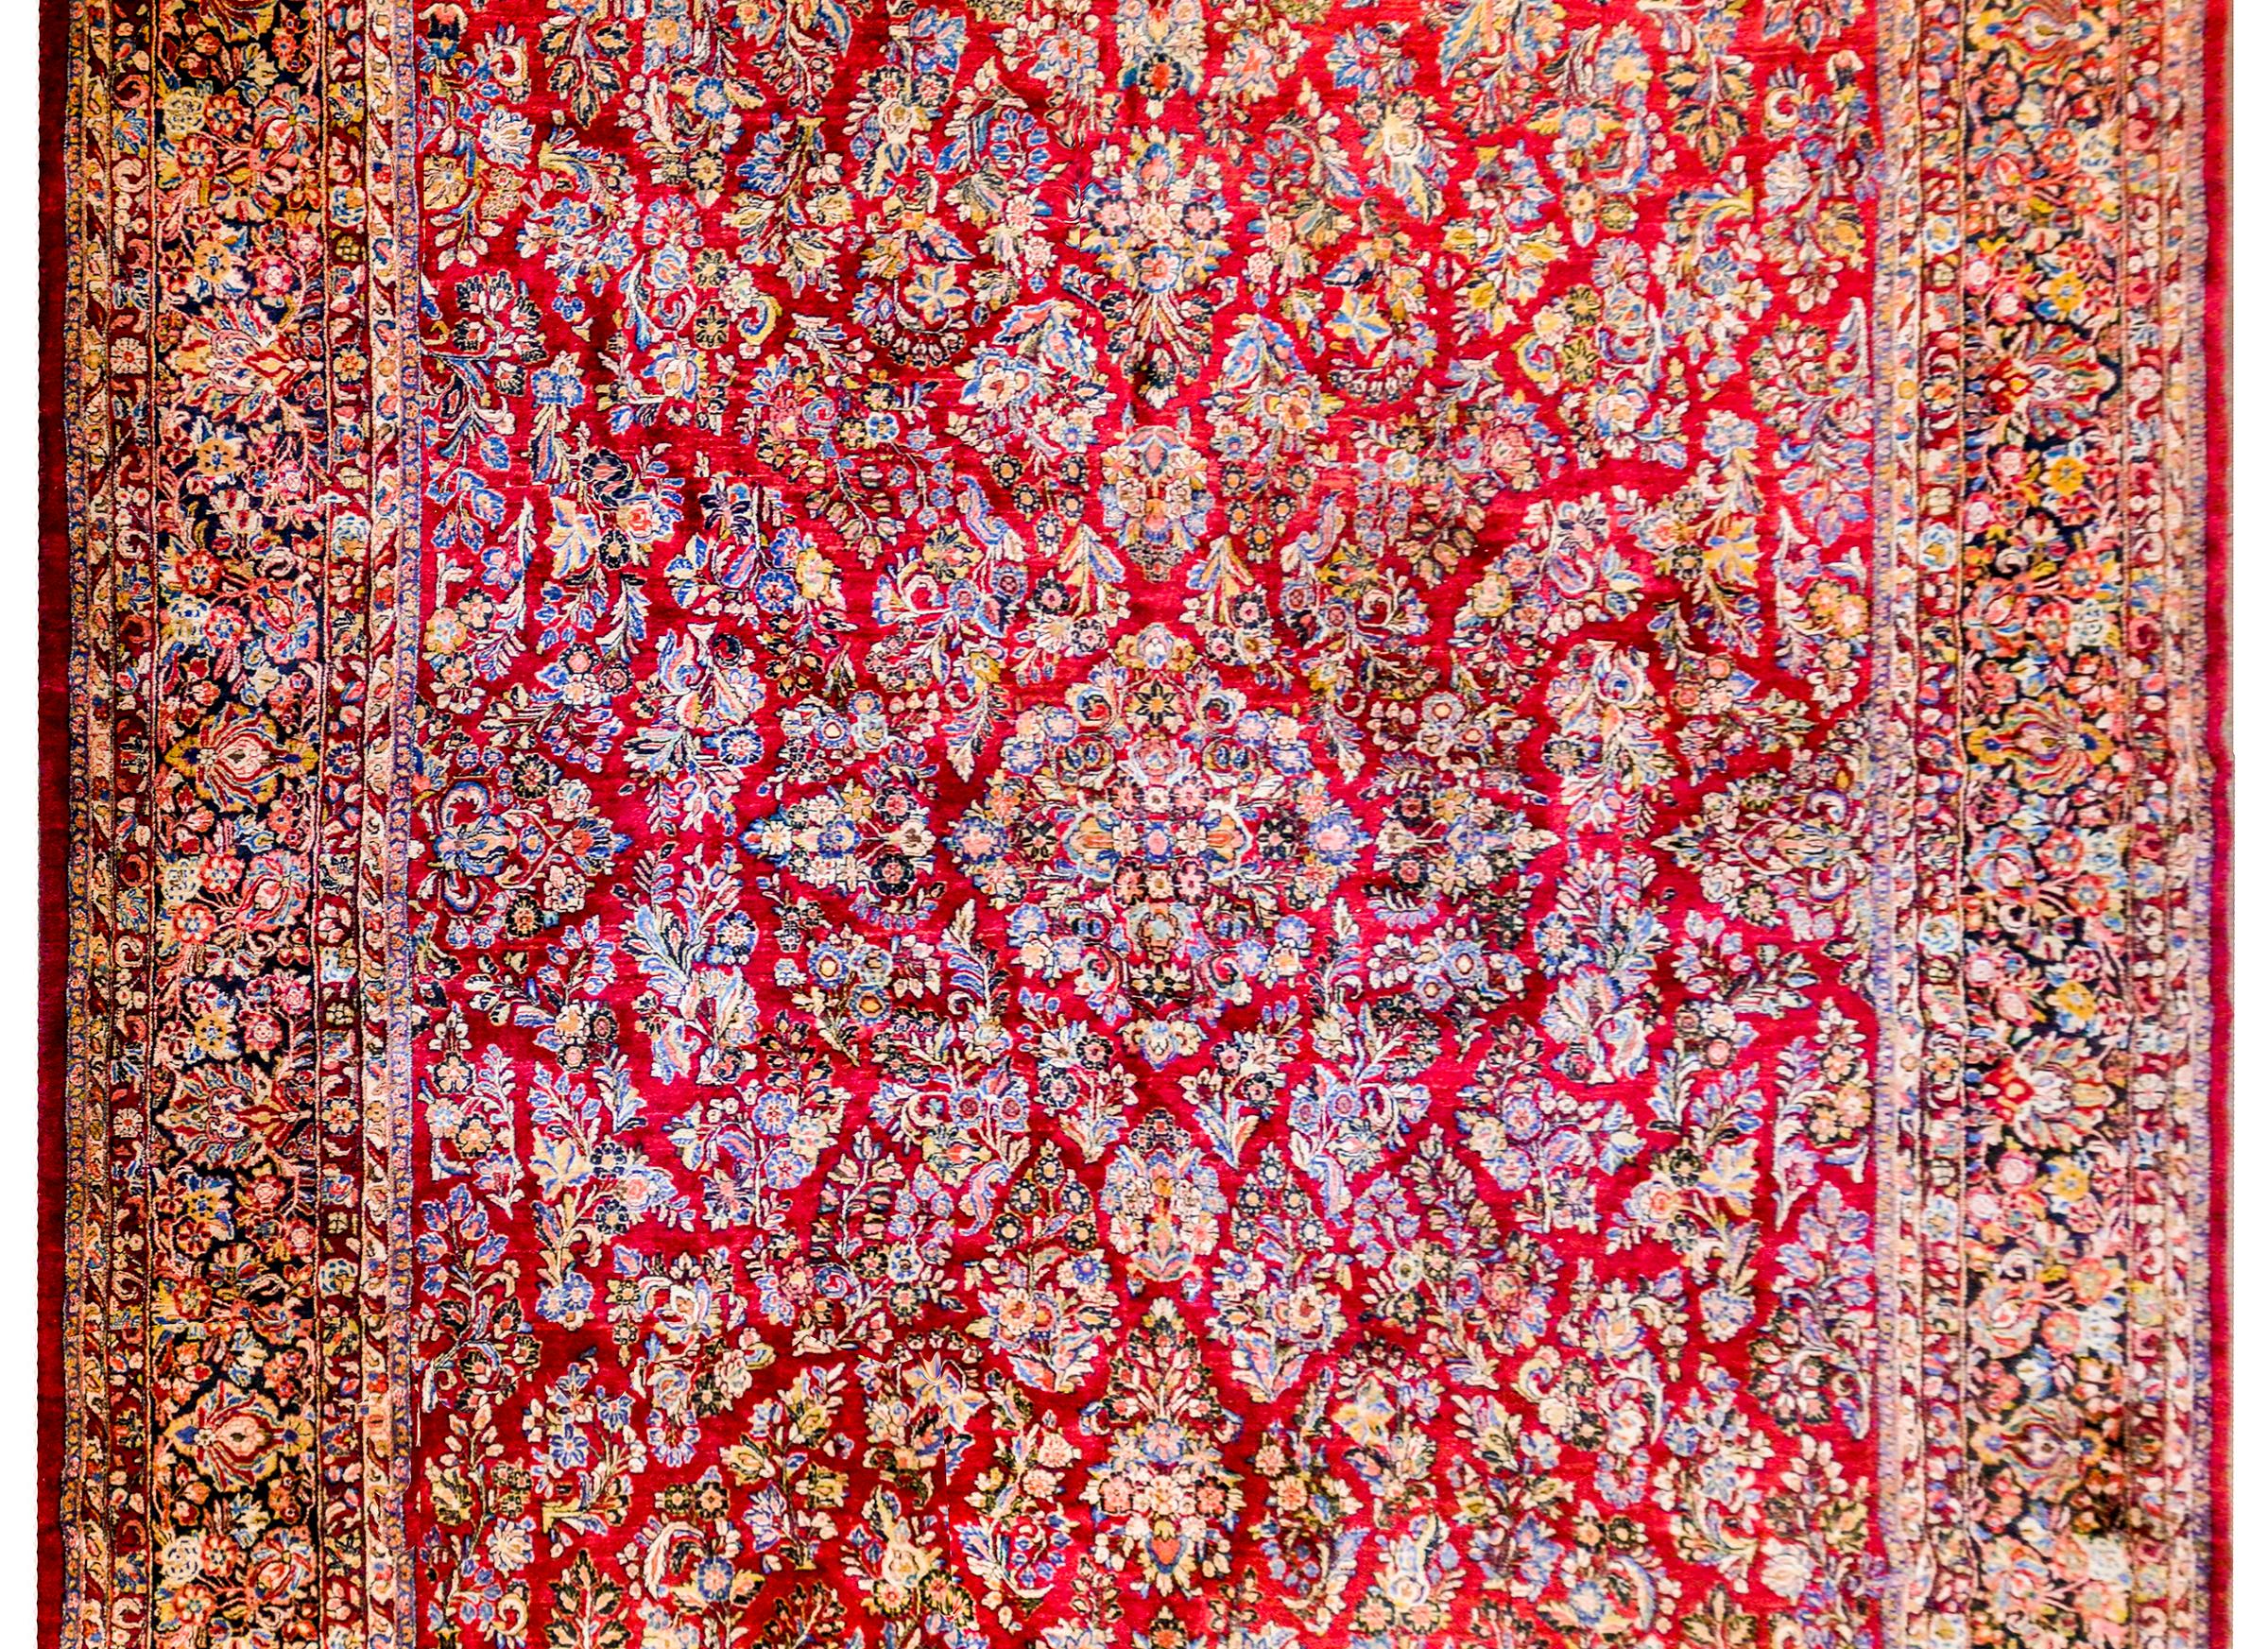 An outstanding early 20th century Persian Sarouk rug with an amazing mirrored myriad floral and leave pattern woven in light and dark indigo, gold, pink, and orange colored wool on a deep crimson backgound. The border is complex with a wide, densely